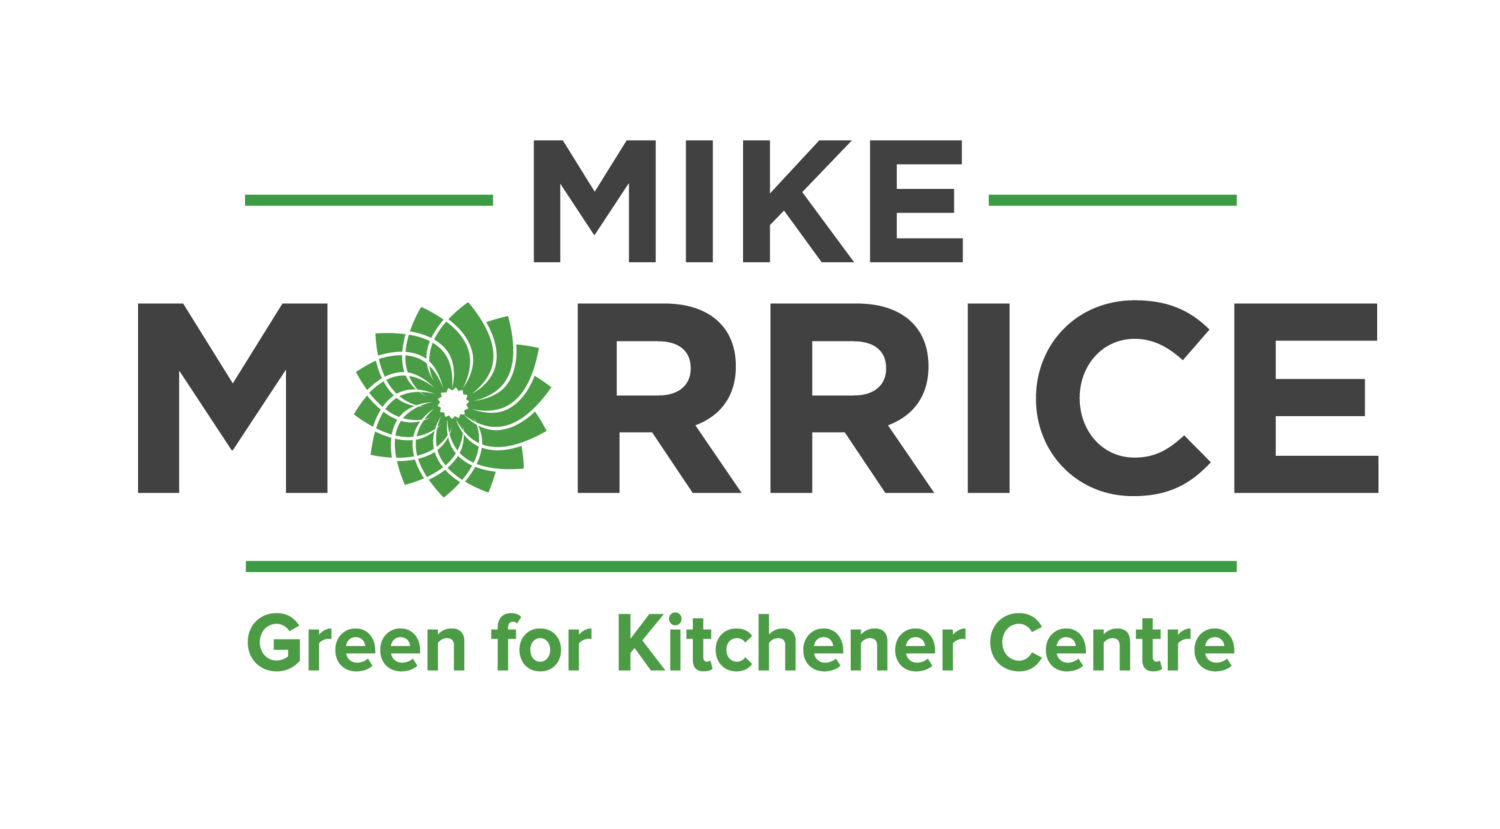 Mike Morrice Green MP for Kitchener Centre